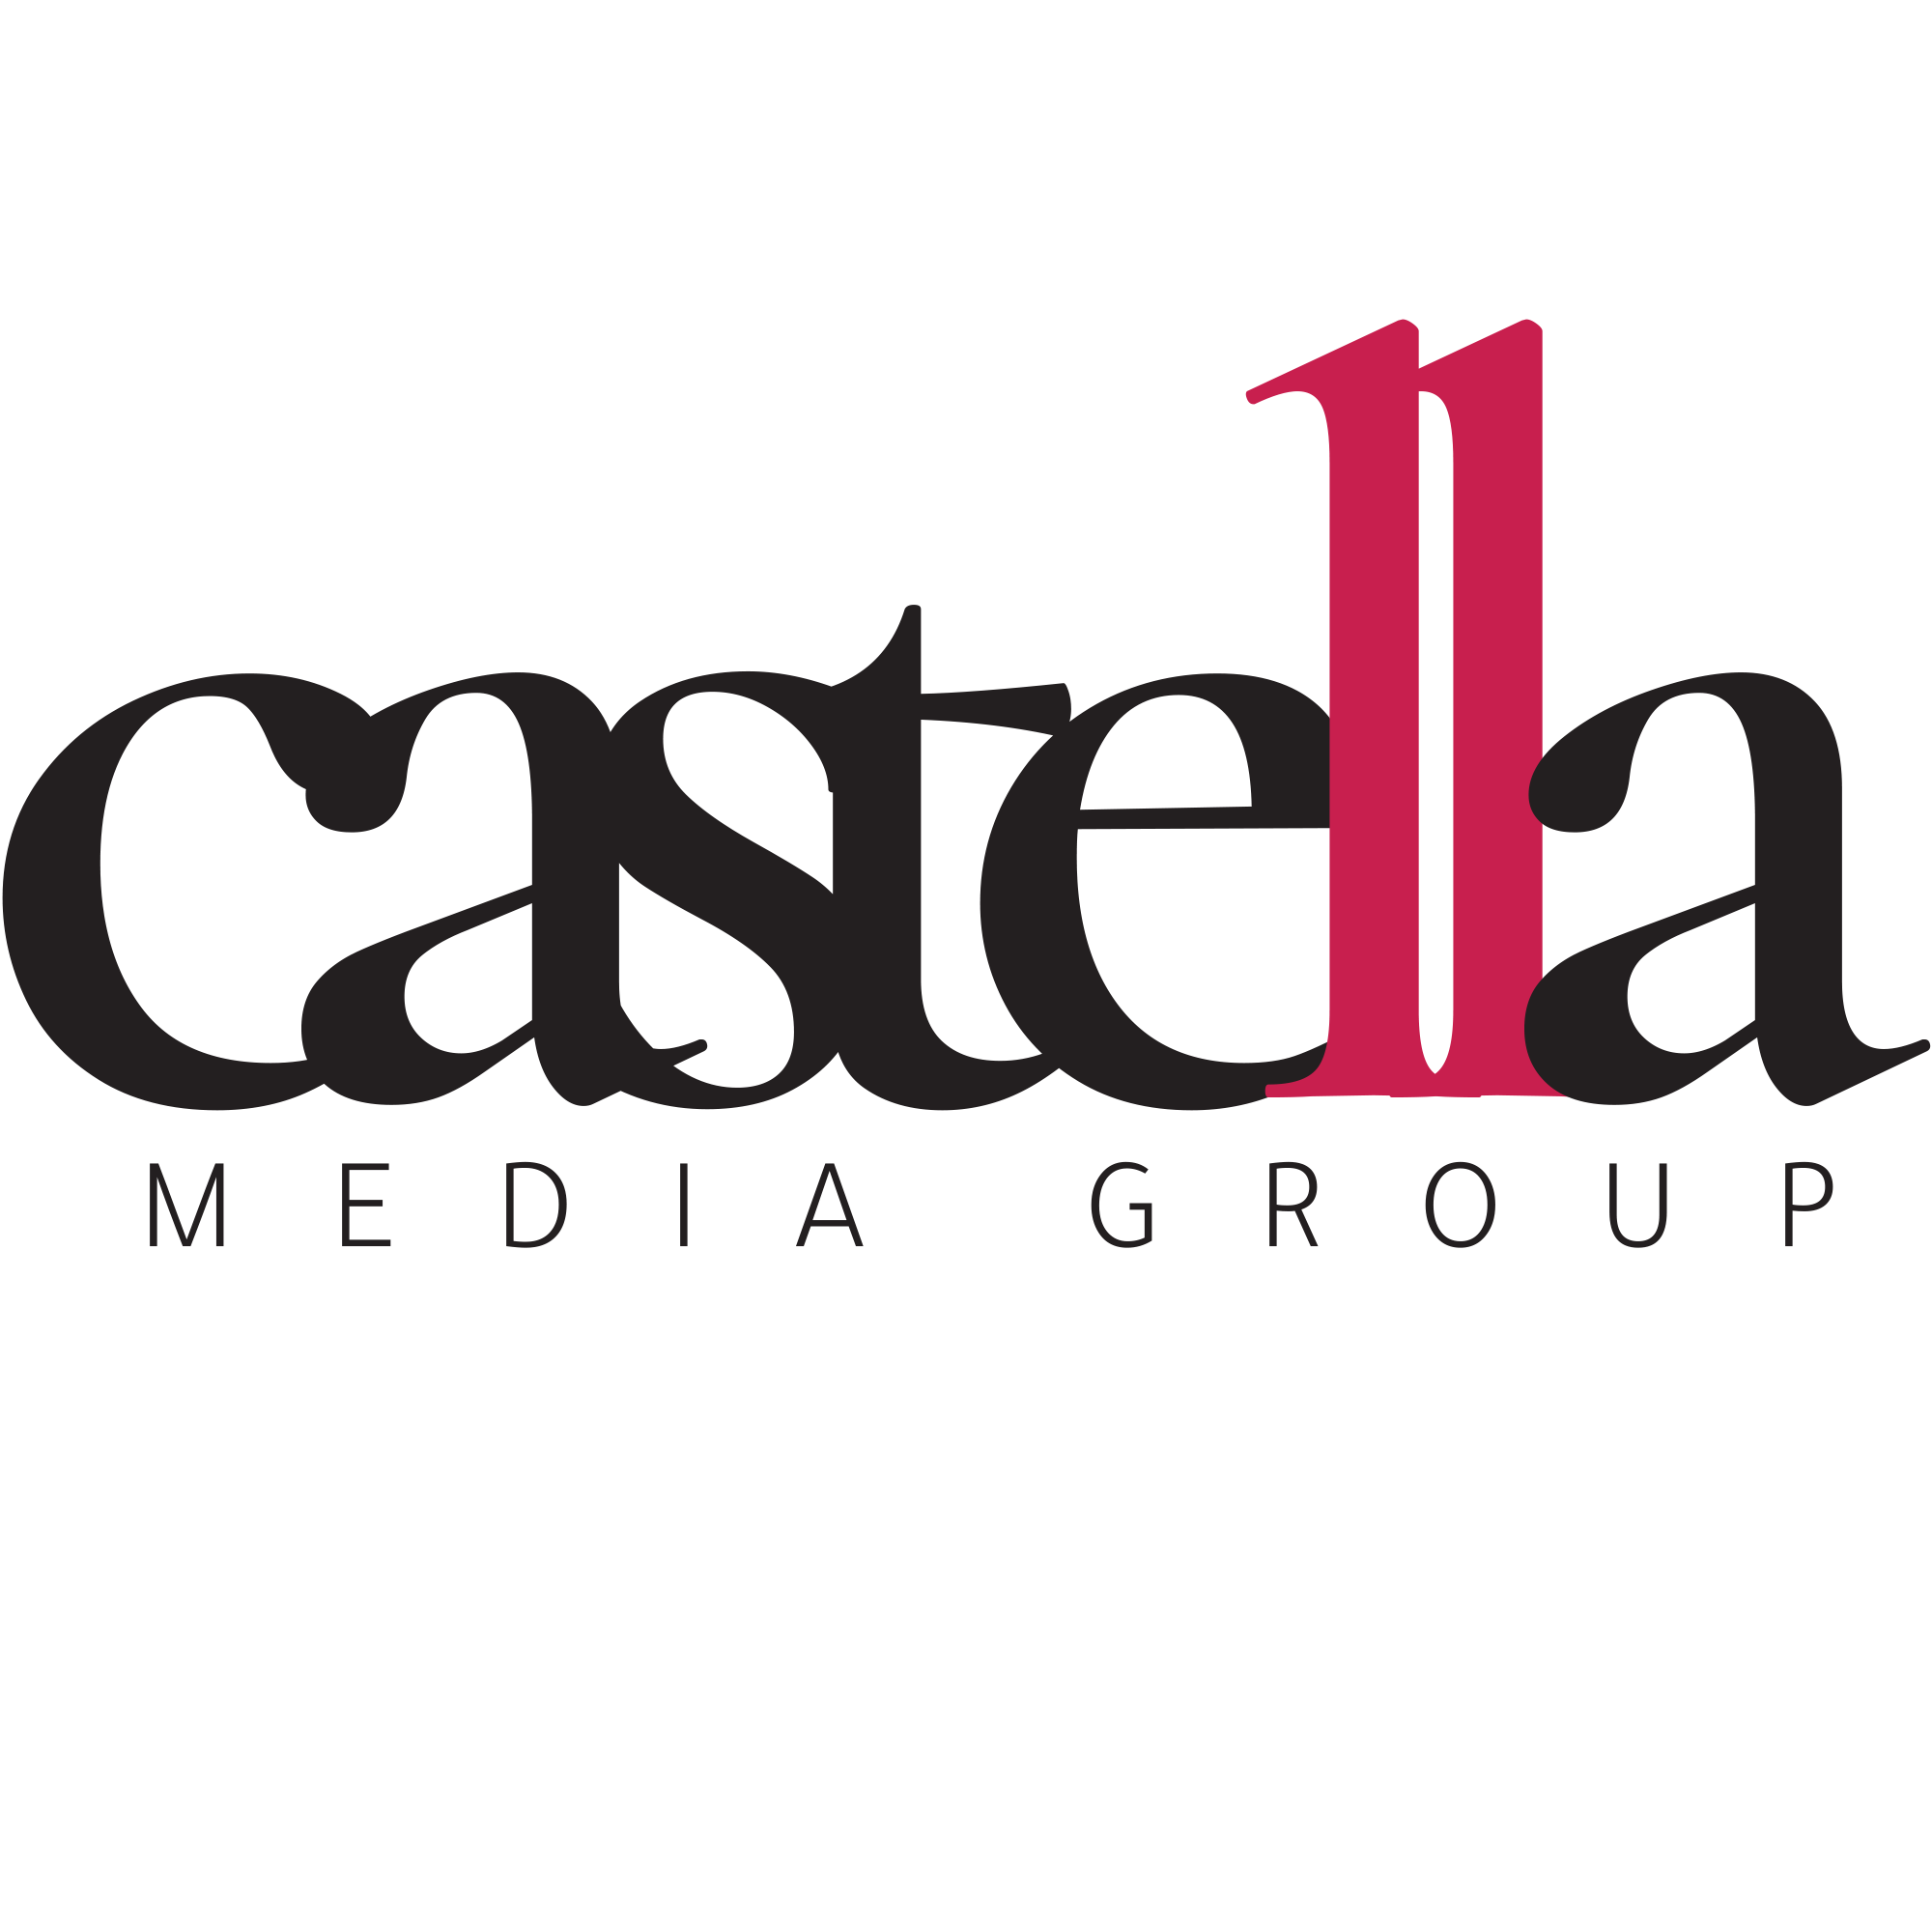 Castella Media Group teams up with Paw Strokes on a digital marketing collaboration